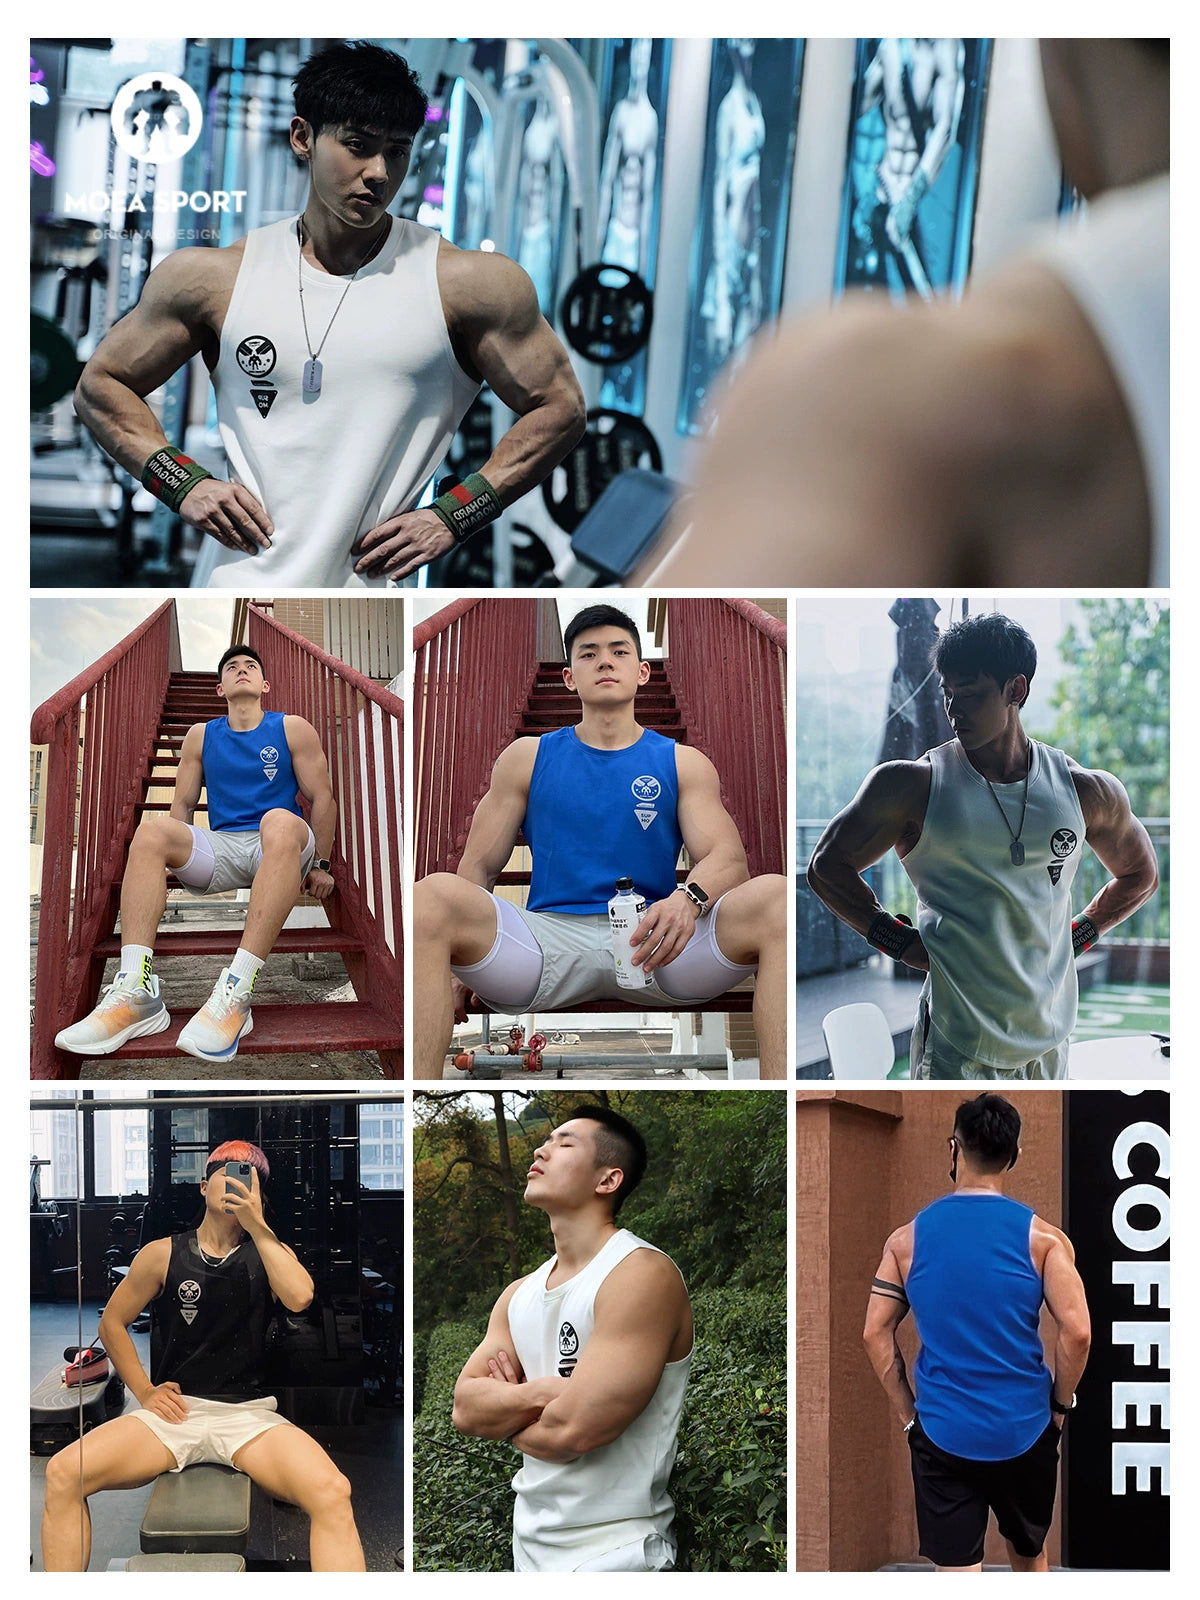 Smooth air layer style round hem camisole fitness vest for men